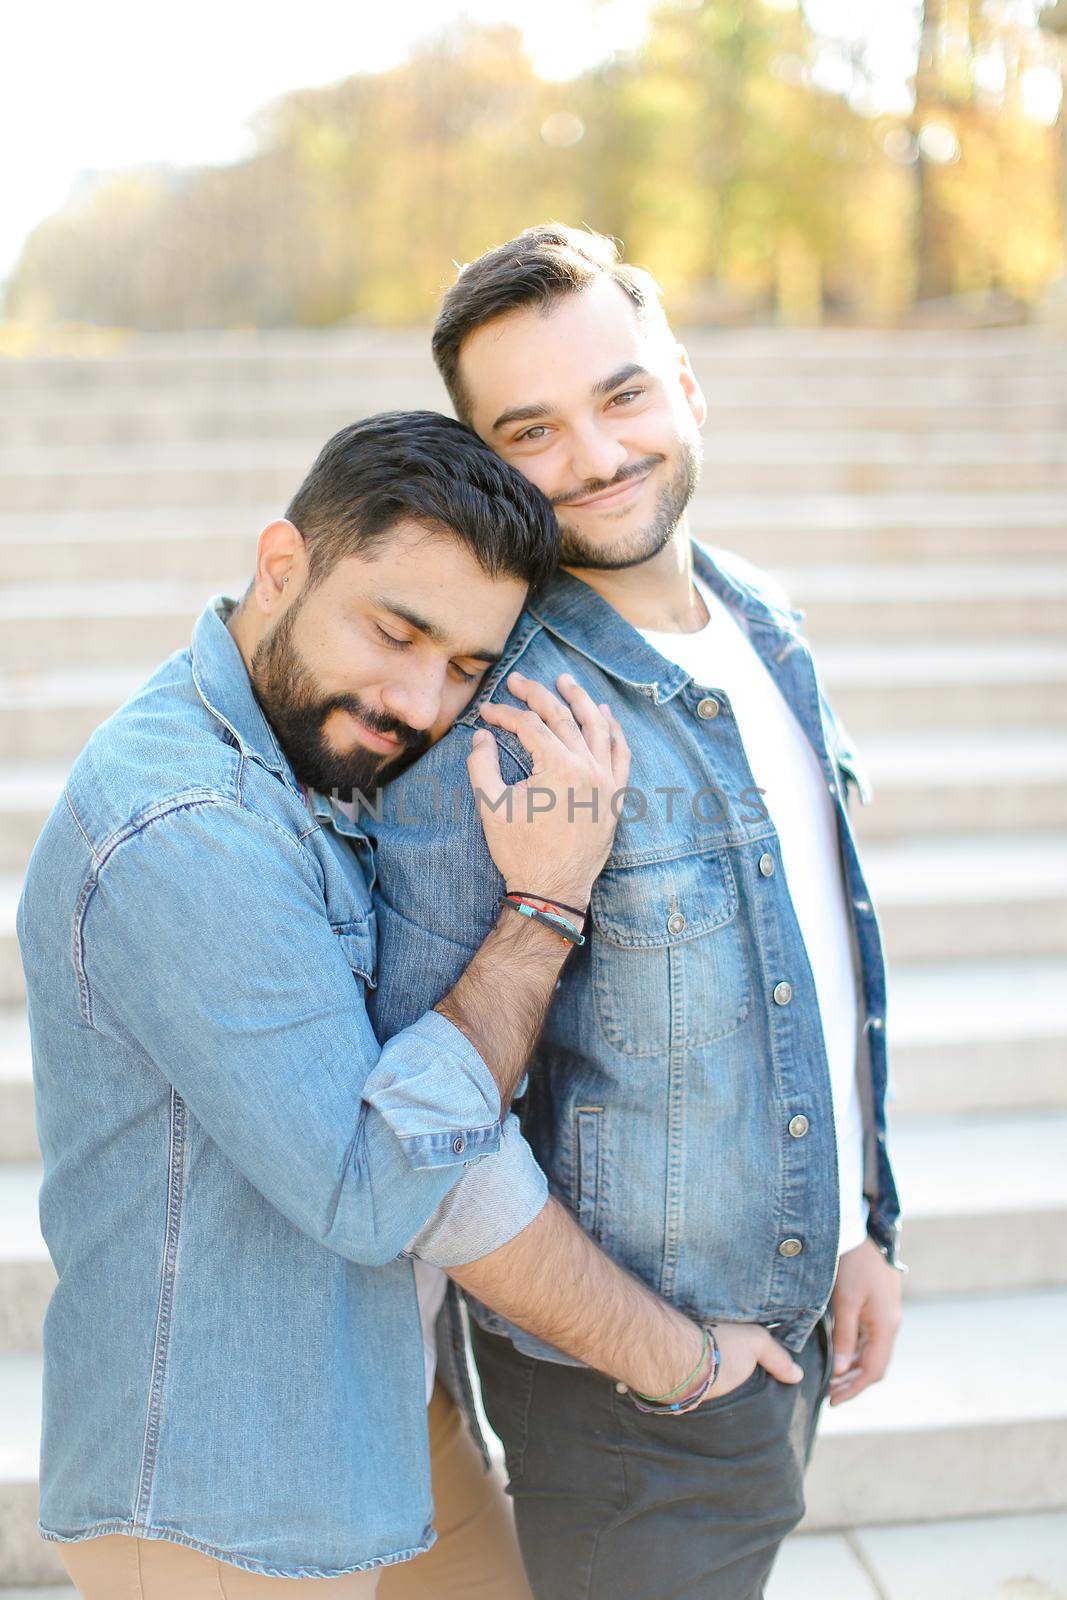 Caucasian young gays hugging in concrete stairs background and wearing jeans shirts. Concept of same sex couple and relationship.